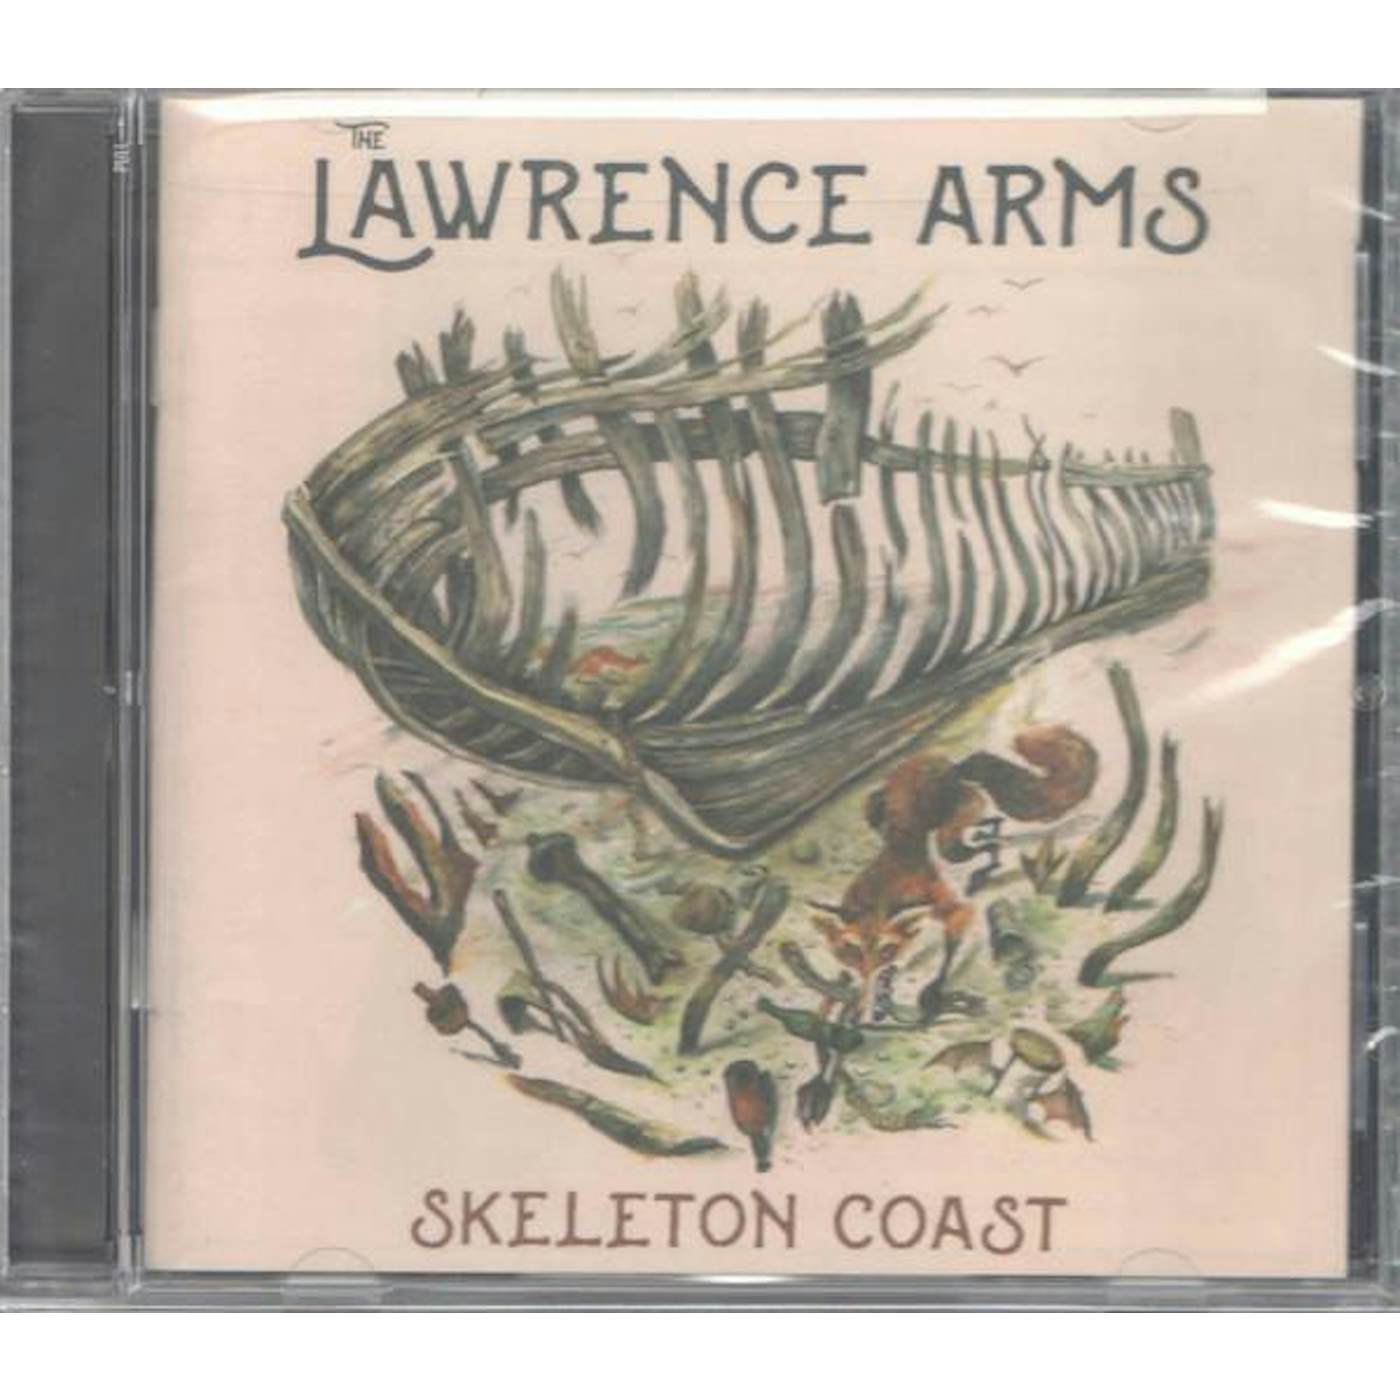 The Lawrence Arms SKELETON COAST CD